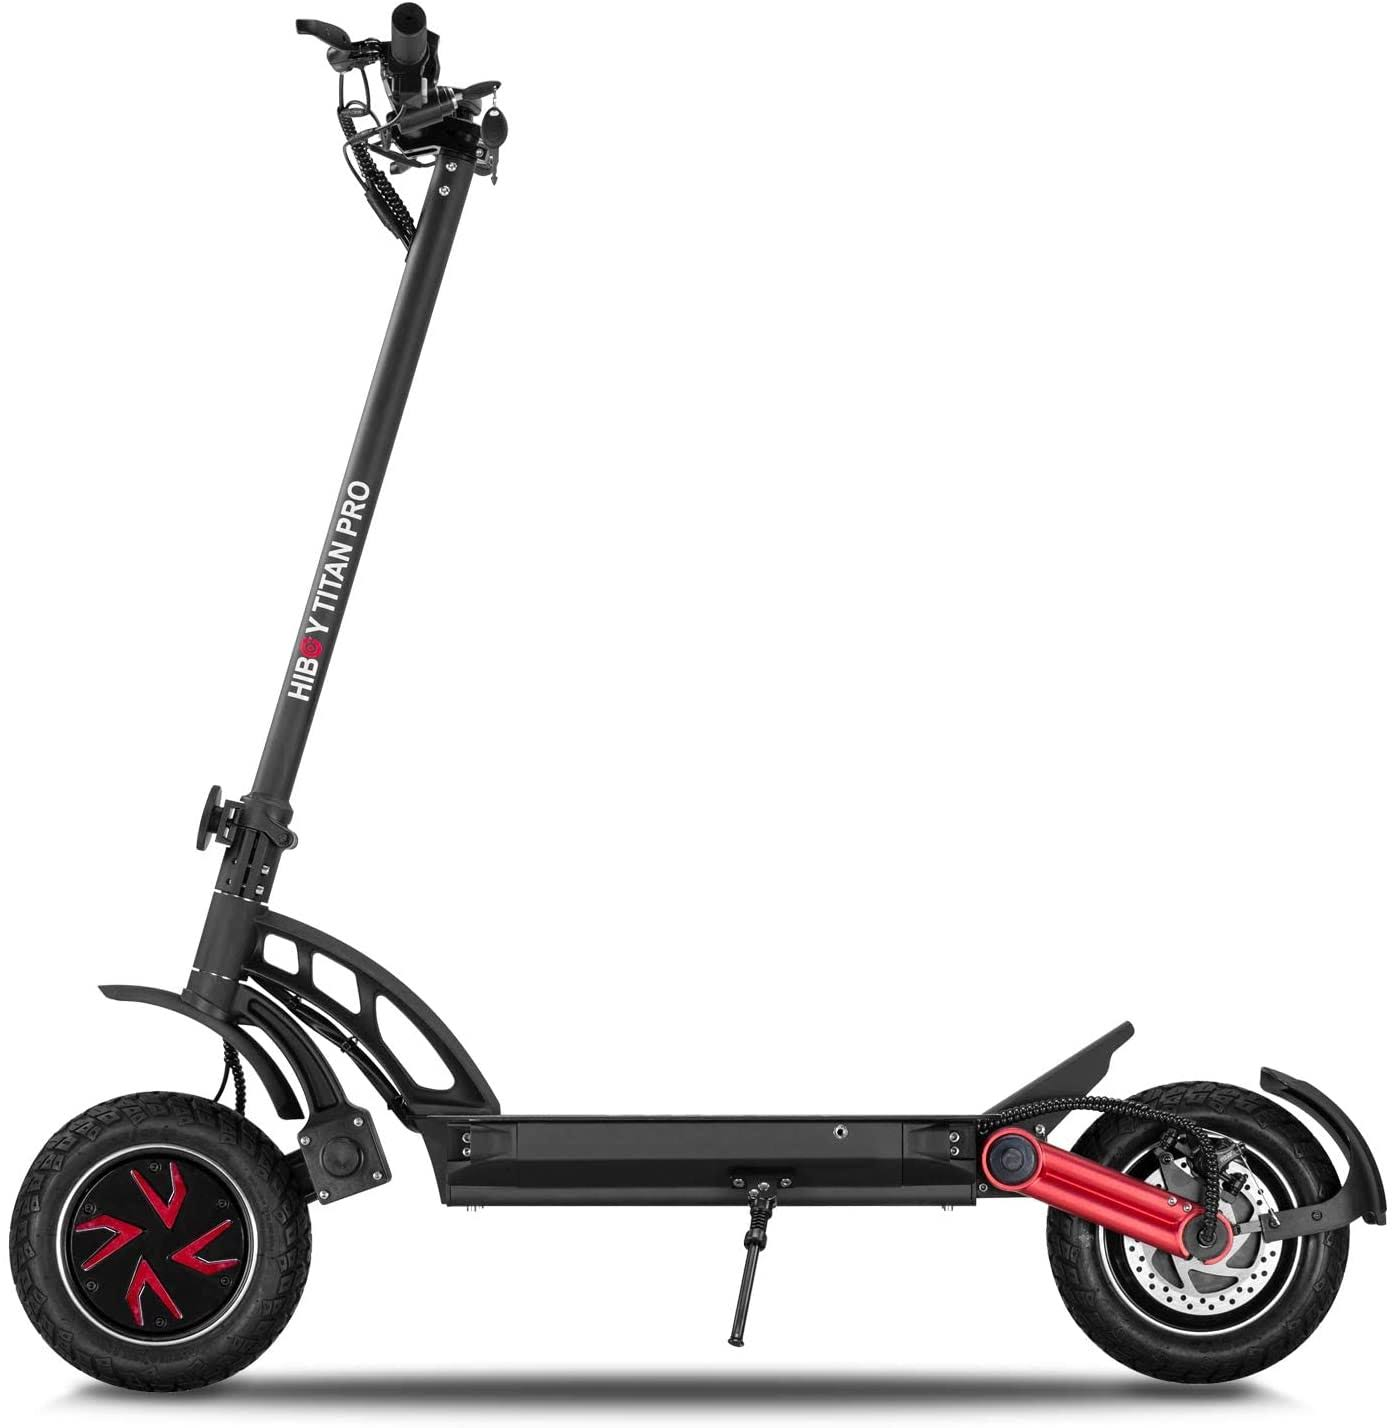 Hiboy Titan Pro Electric Scooter  C 2400W Motor 10″ Pneumatic Tires Up to 40 Miles & 32 MPH Quick-Release Folding, Electric Scooter for Adults Dual